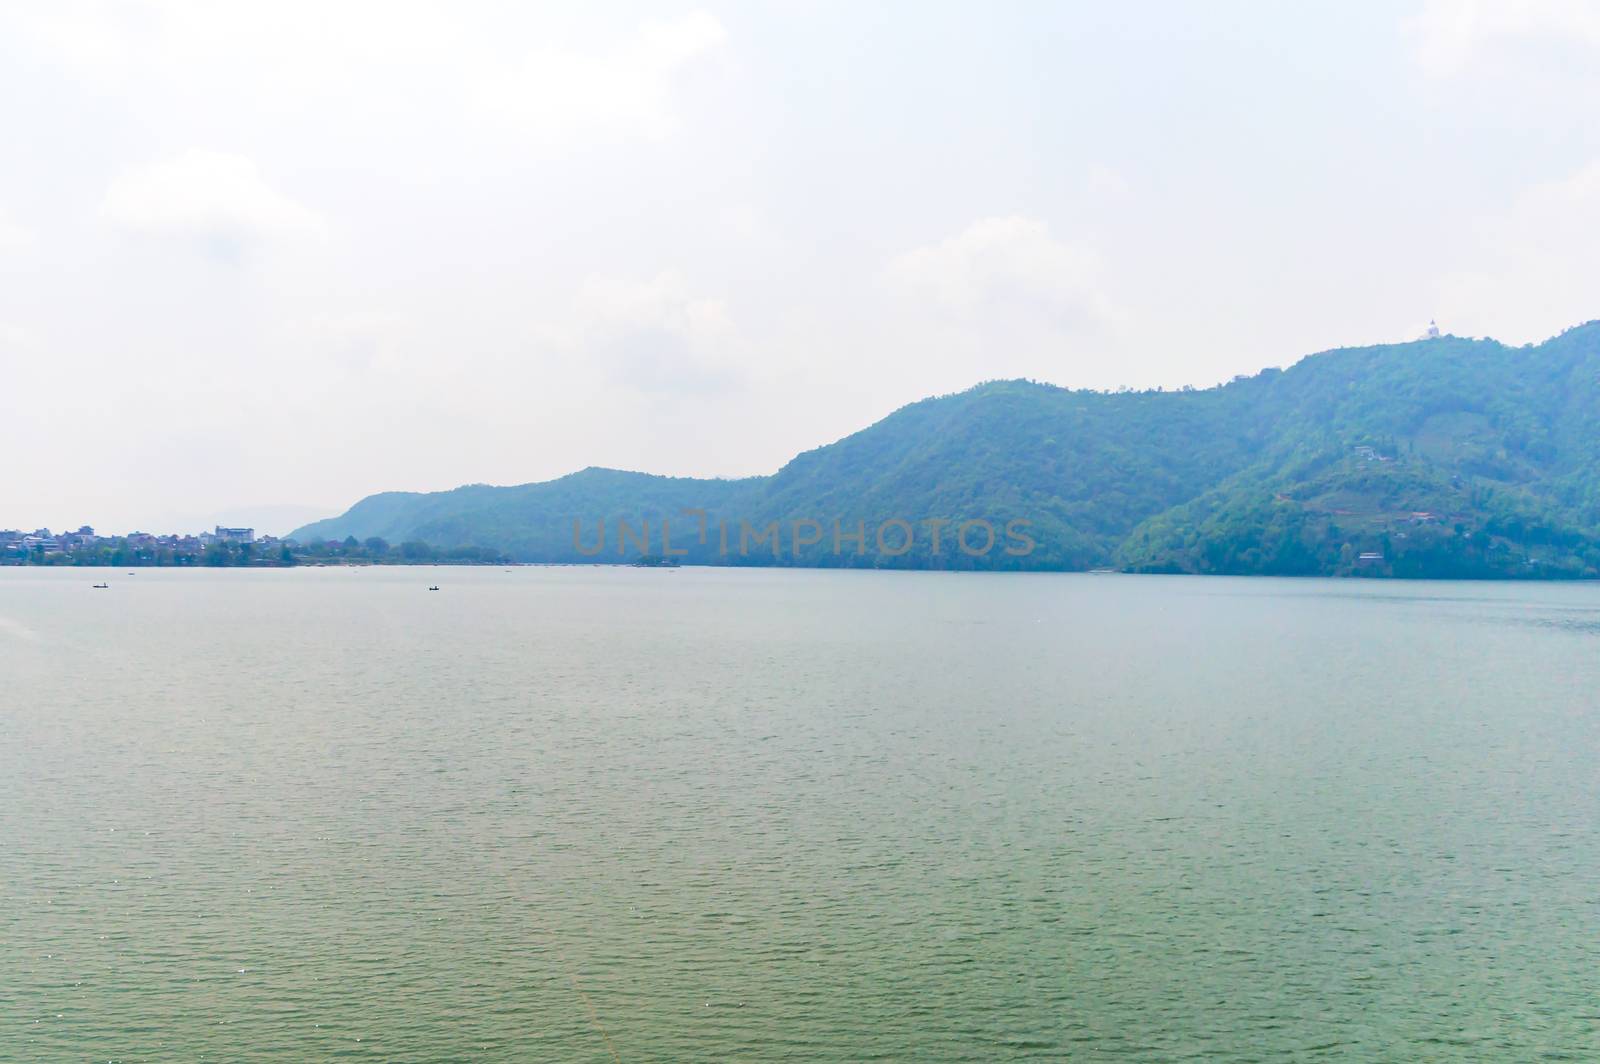 Photograph of sky, lake, mountain and reflexion Near Pokhara Lake at Kathmandu Nepal. Snap in portrait, landscape, wide screen. Vintage film look. Nature Freedom, Travel, Energy, Environment Concept. by sudiptabhowmick